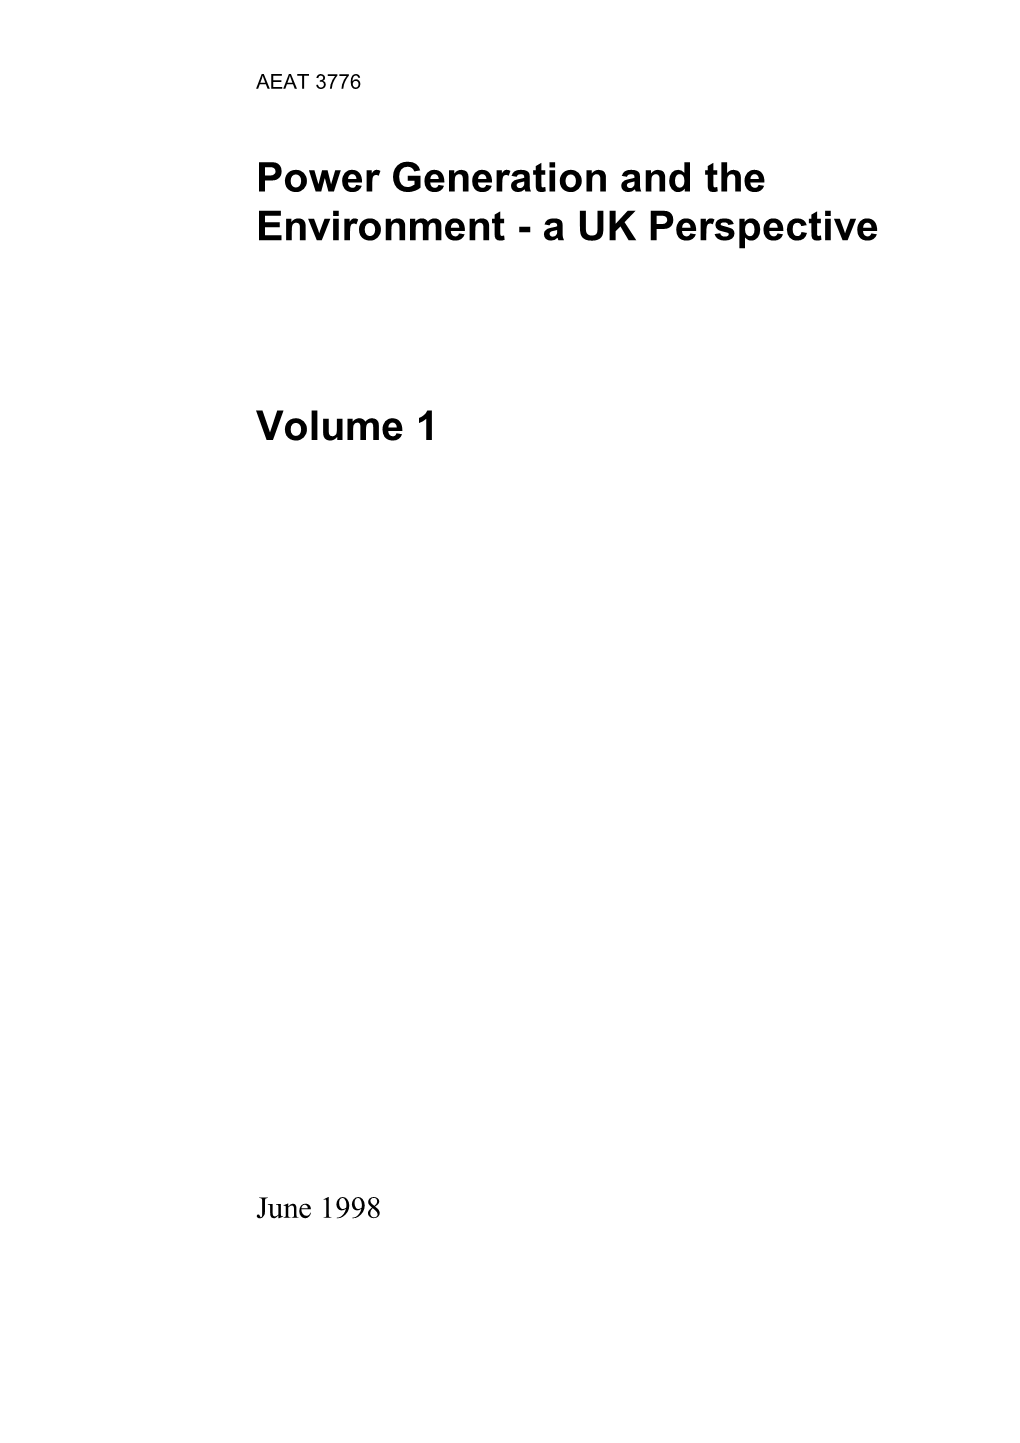 Power Generation and the Environment - a UK Perspective